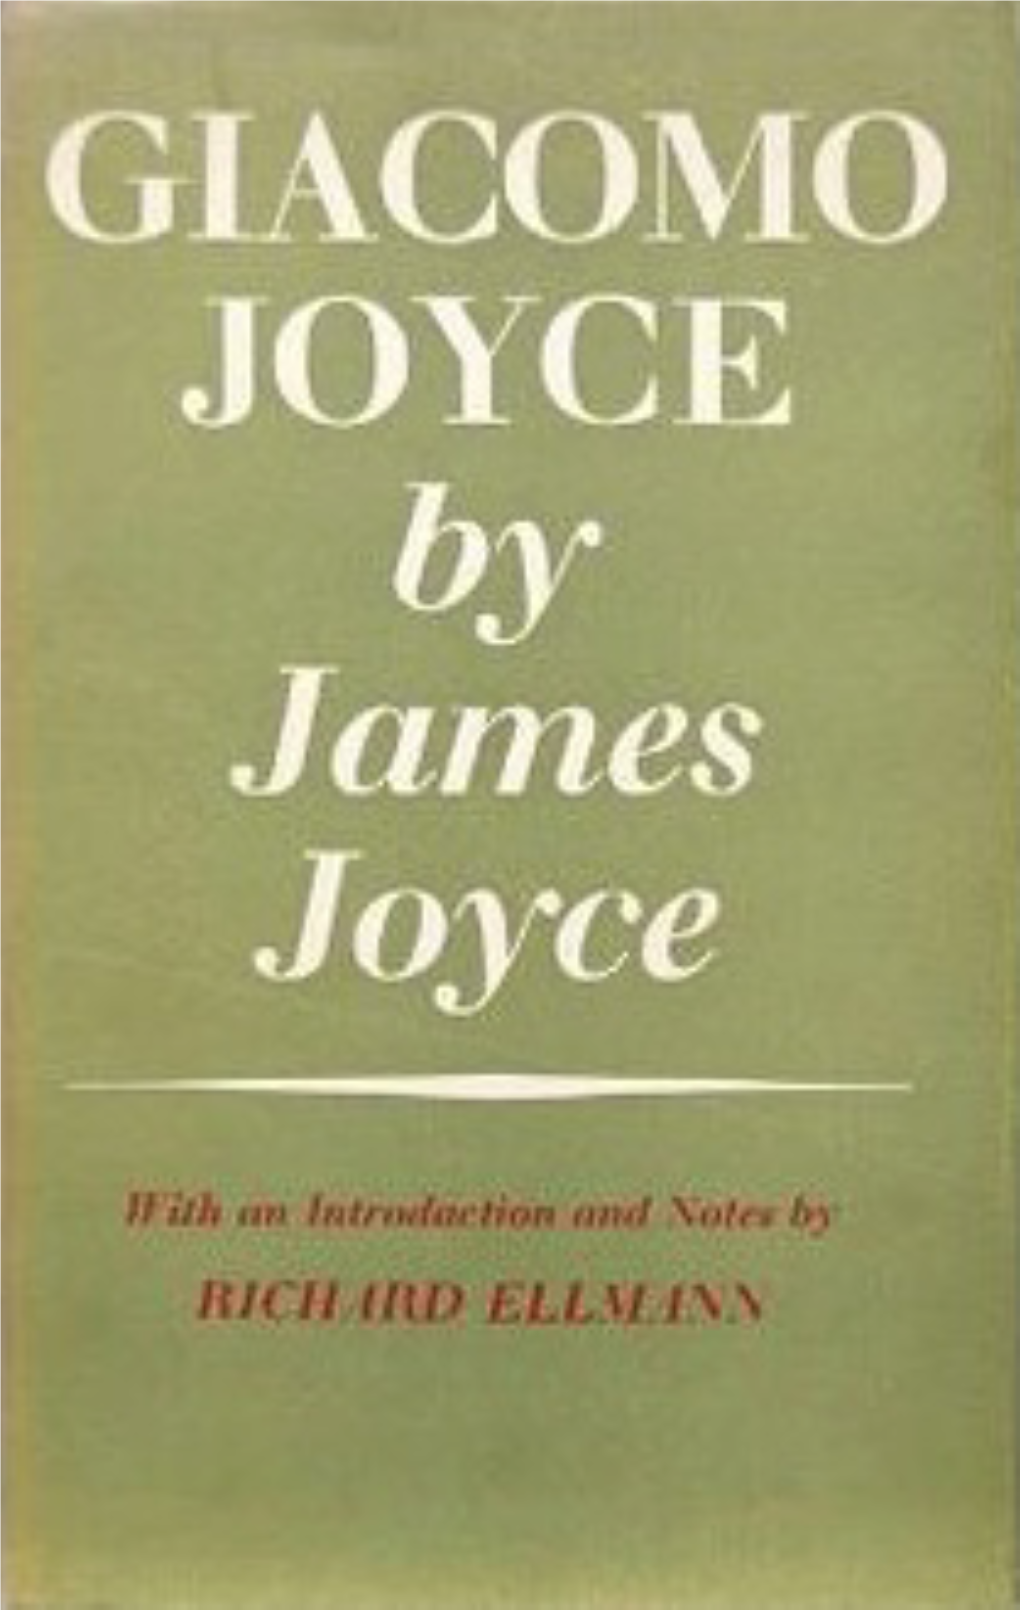 Giacomo Joyce Are Quoted in Richard Ellmann's James Joyce, Oxford University Press (New York and London, 1959), and Other Excerpts in Harper's Magazine, January 1968